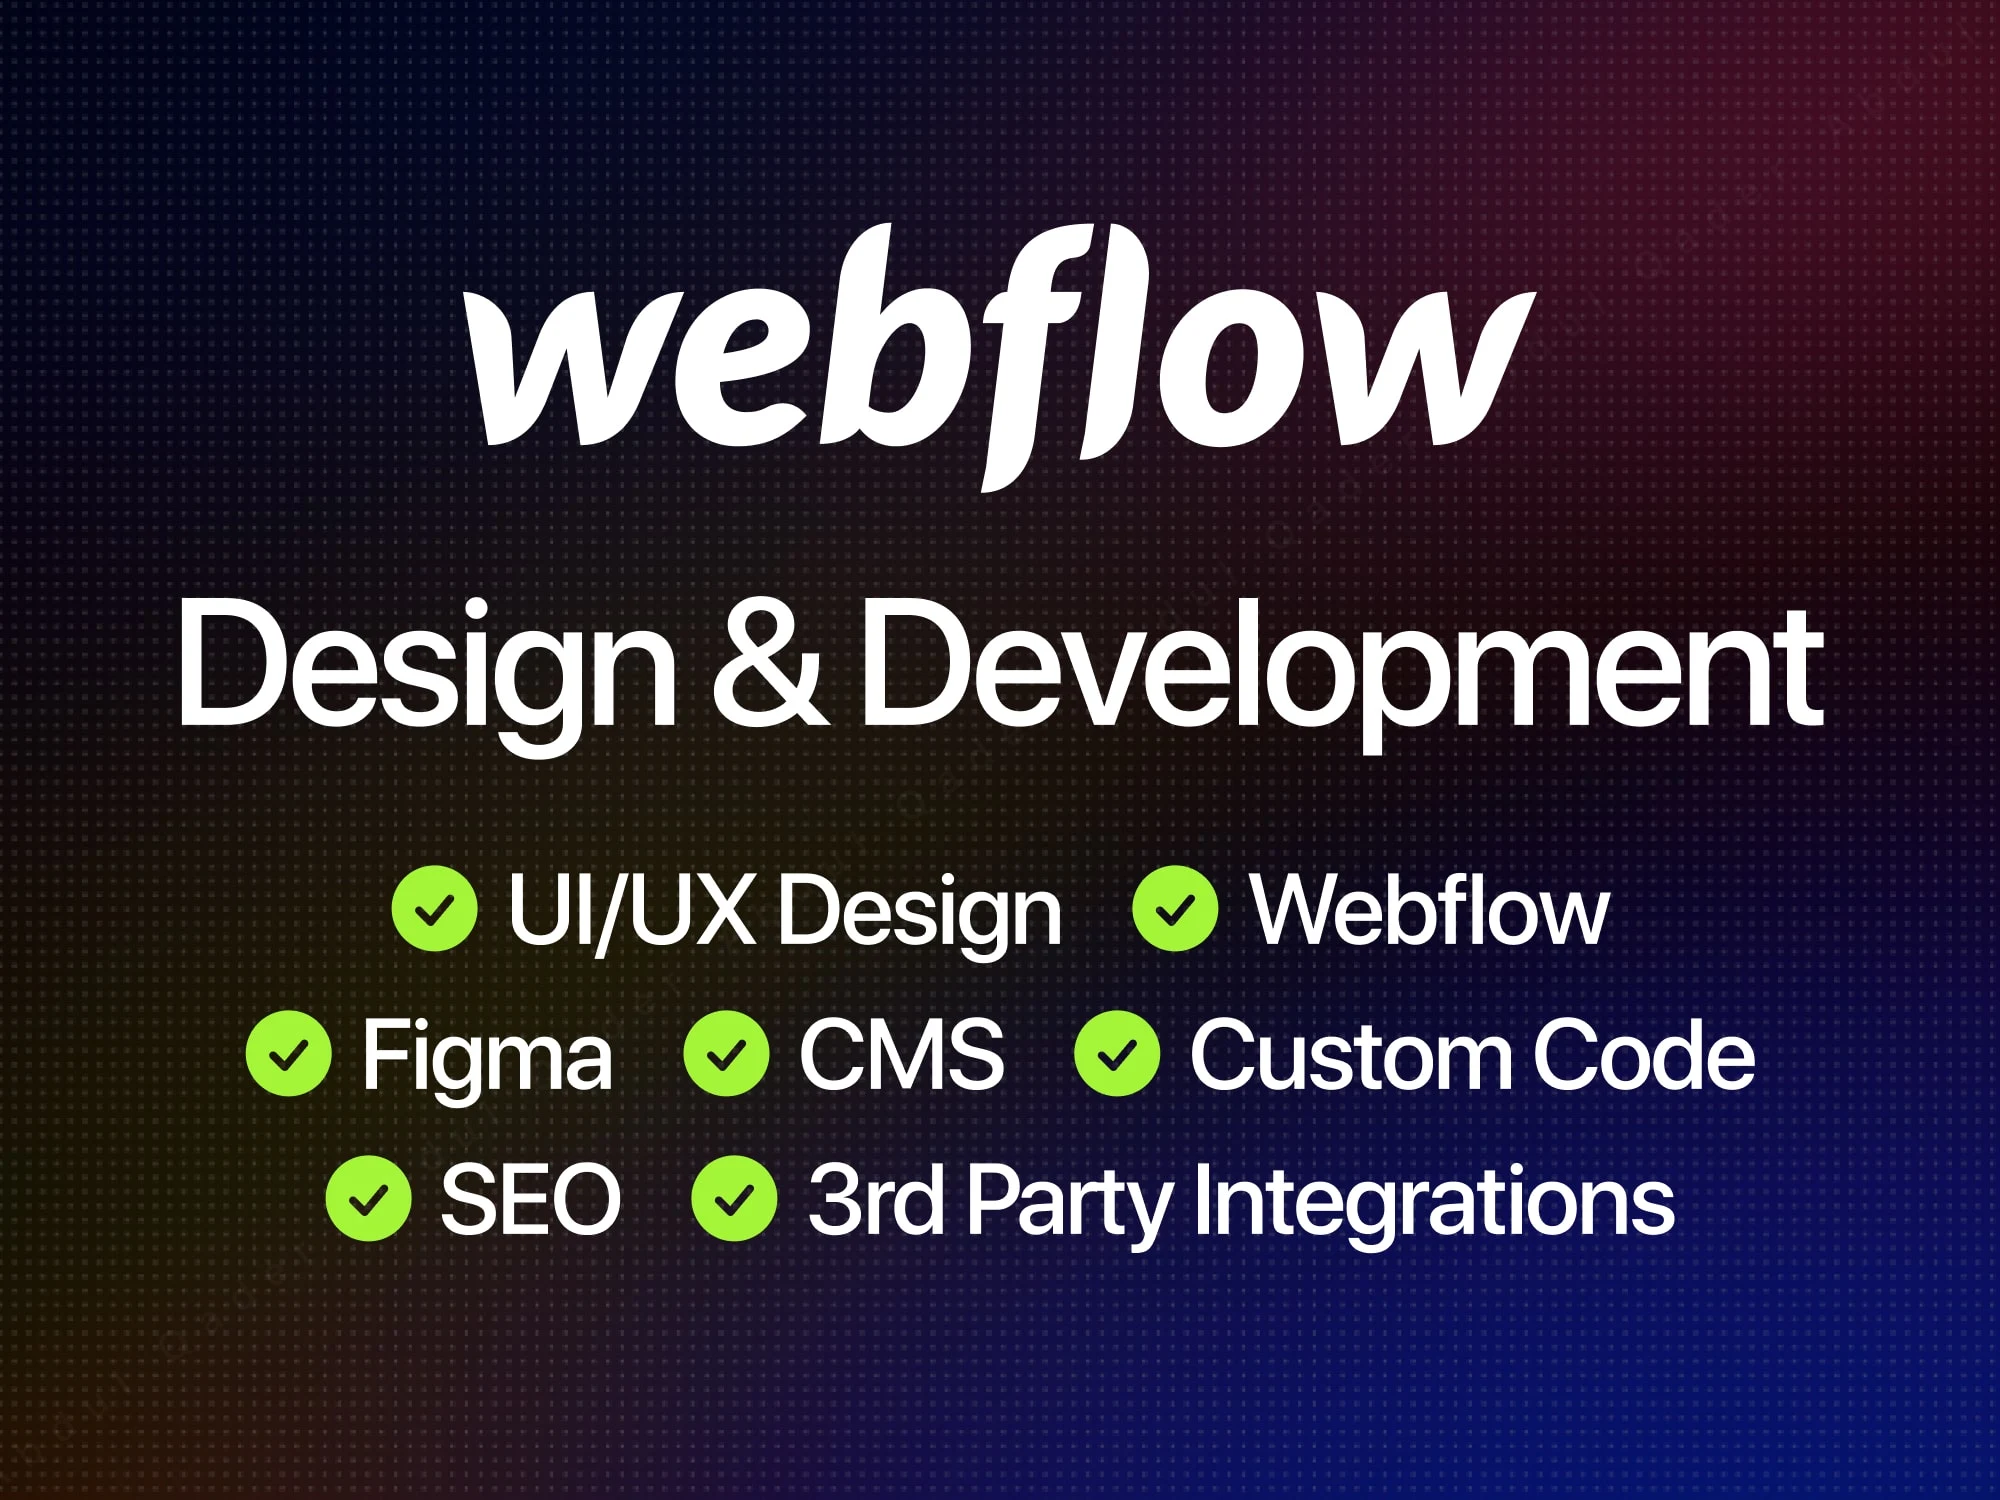 Unlimited Webflow Design and Development, a service by Abdul Qader